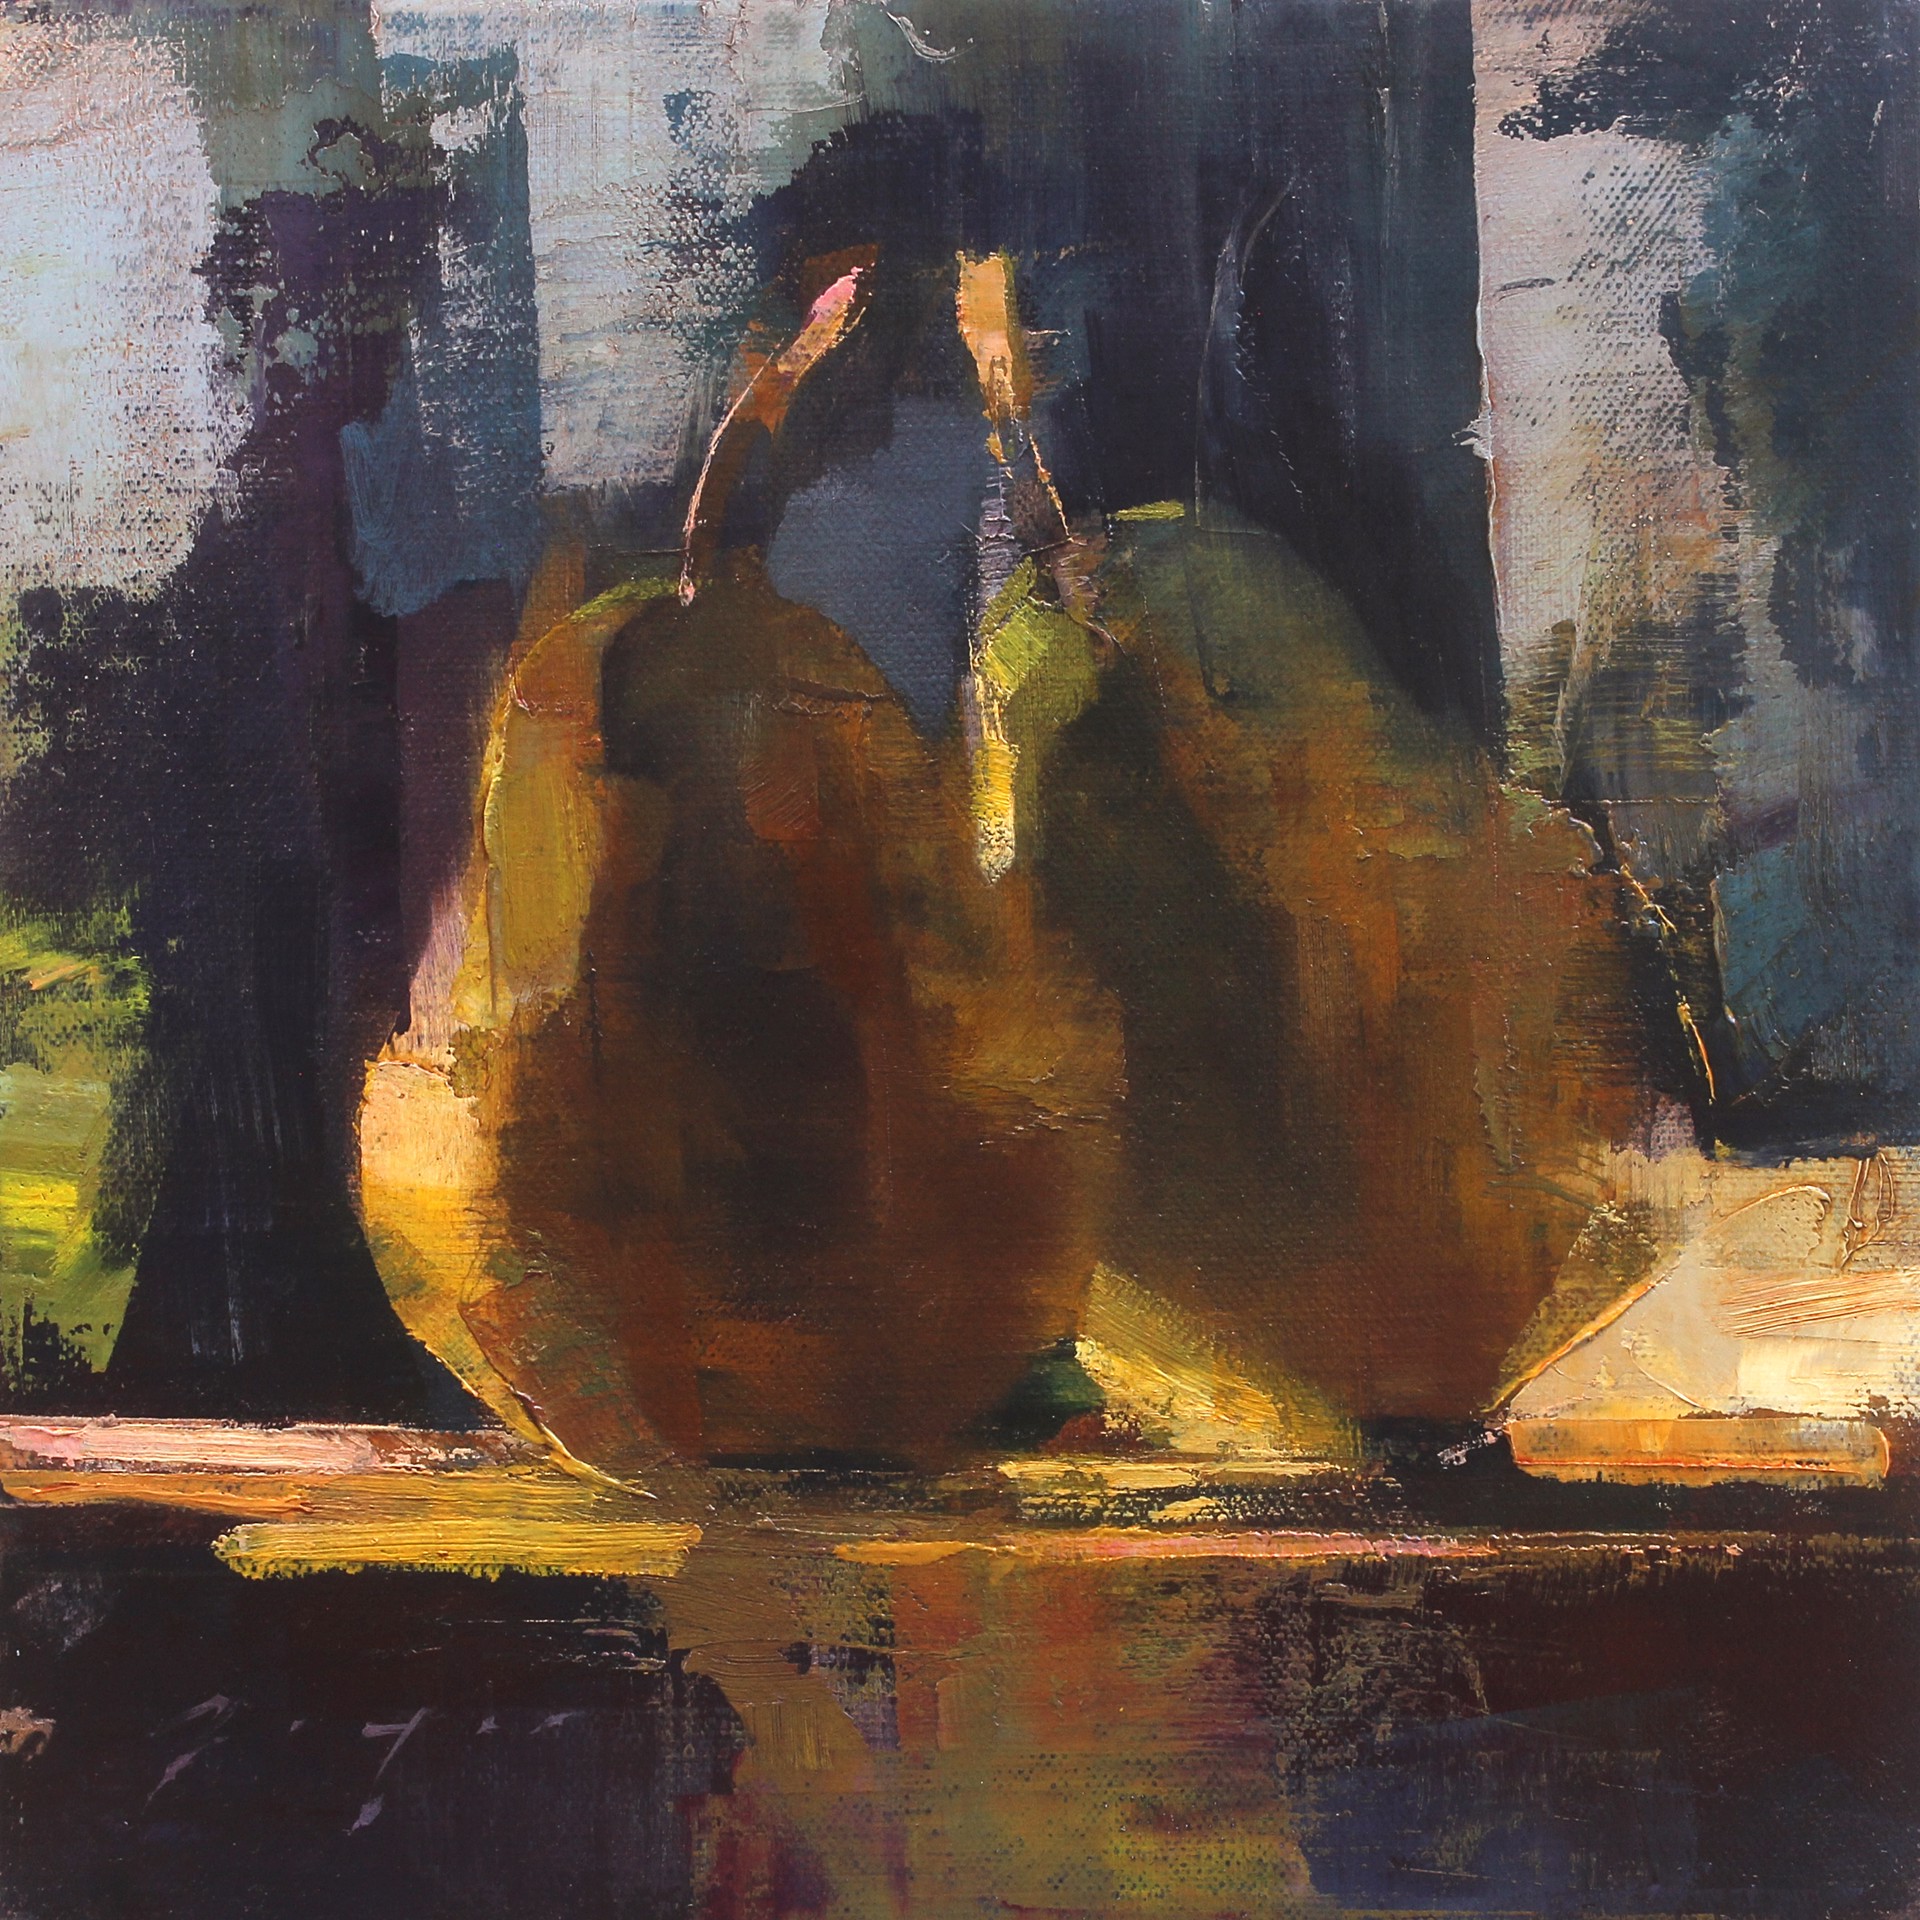 Study of Two Small Pears by Douglas Fryer